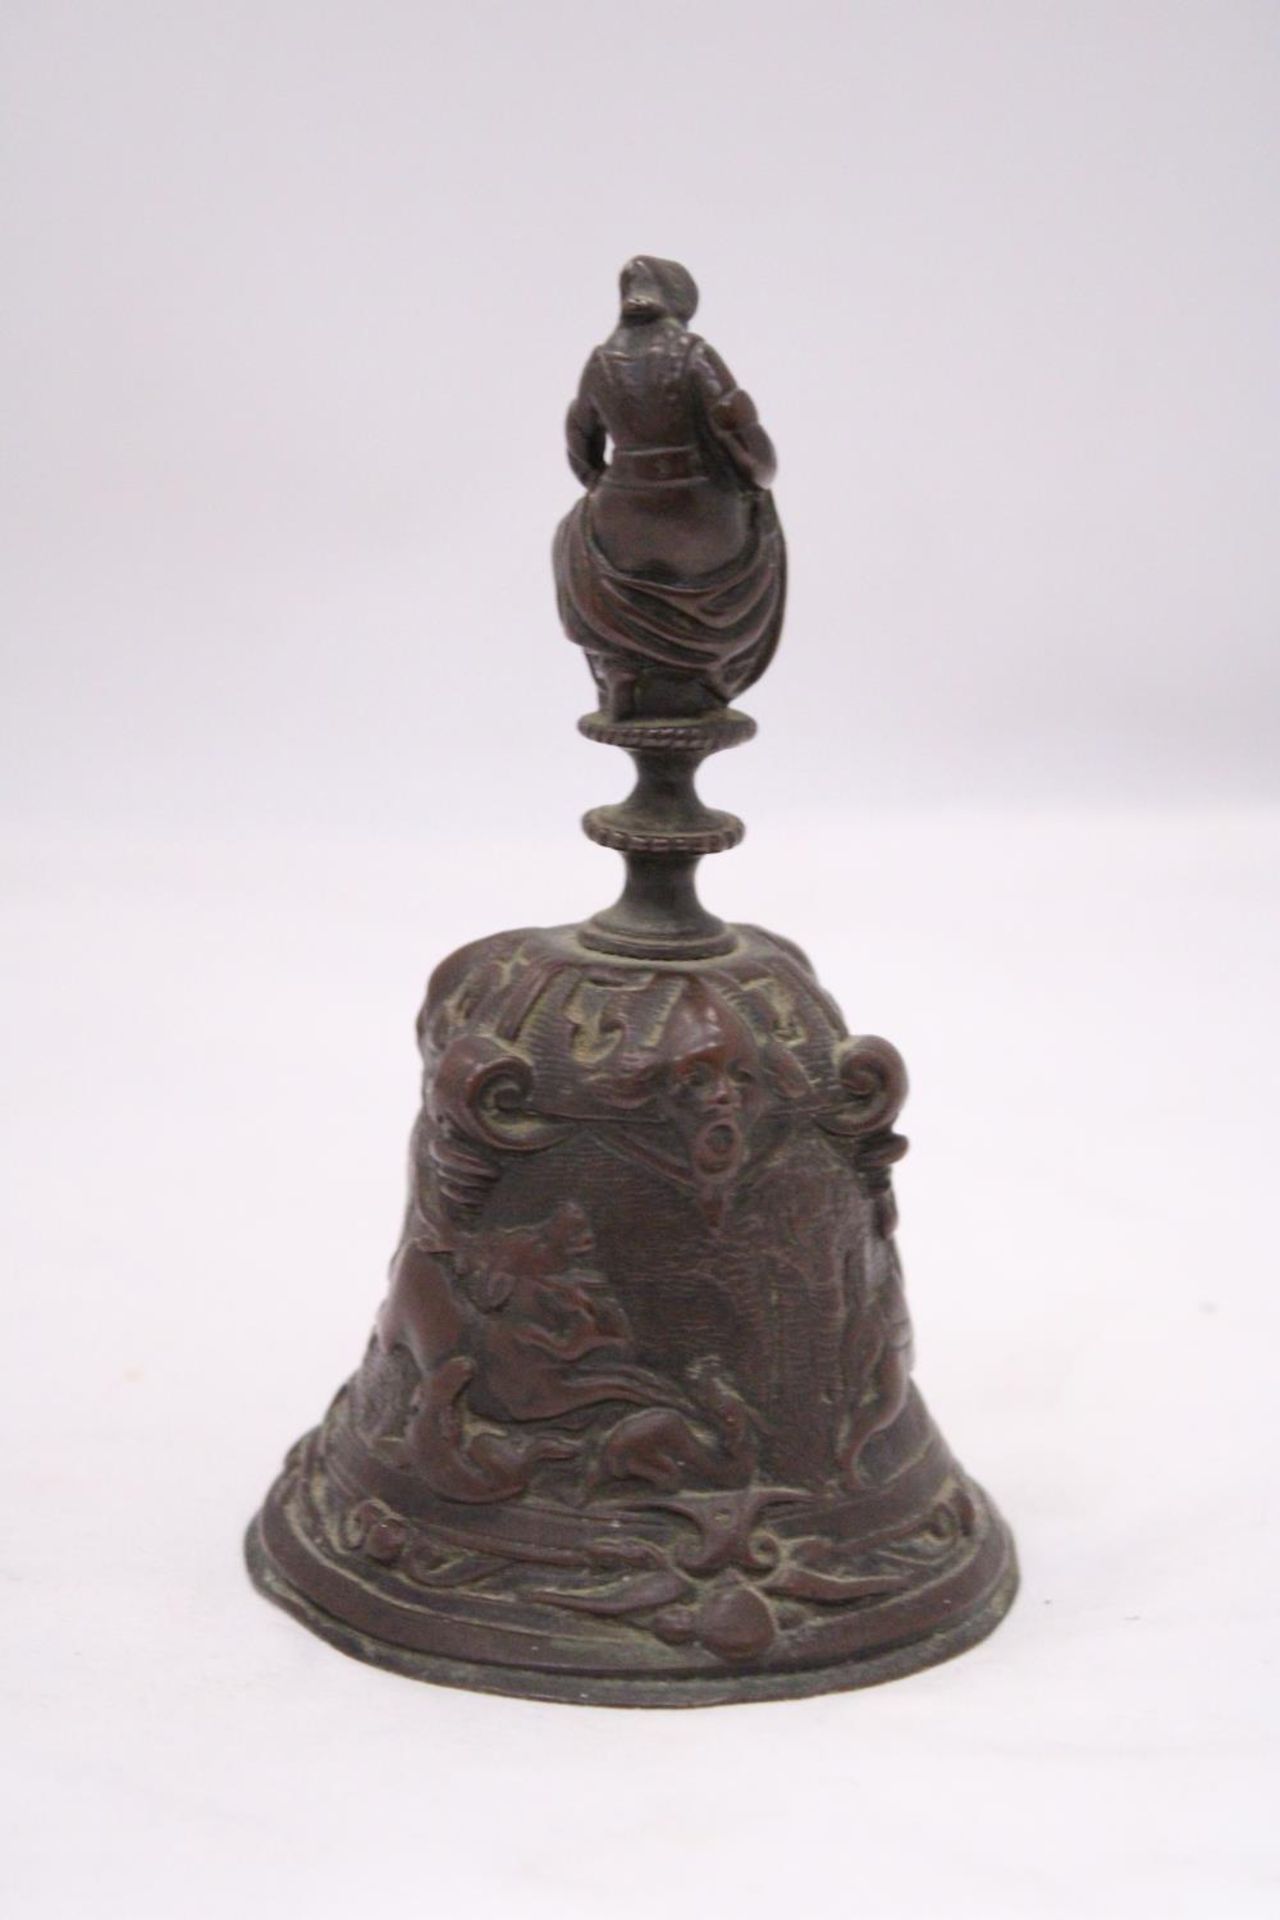 A ORIENTAL BRONZE BELL DEPICTING A HUNTING SCENE AROUND BASE OF BELL - Image 4 of 6